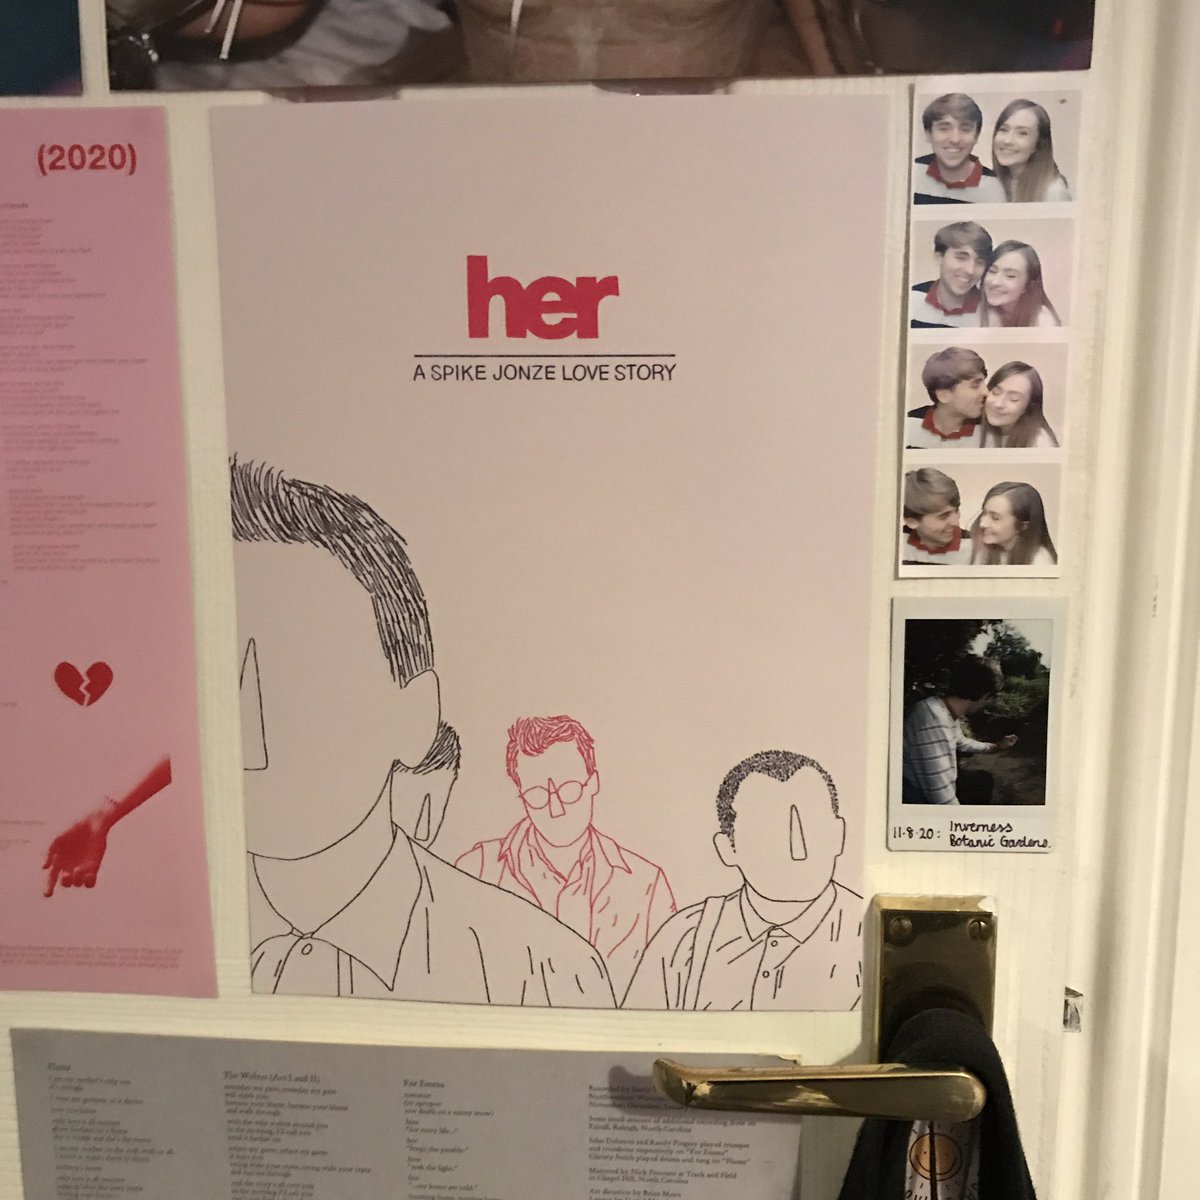 Prints-wise, I adore the prints I have from Tillie CM; her artwork is absolutely beautiful and her drawing of ‘Her’ (my favourite film) is just stunning. She does film prints in various sizes and postcards! Her shop:  http://www.etsy.com/uk/shop/TillieCrawfordMiller